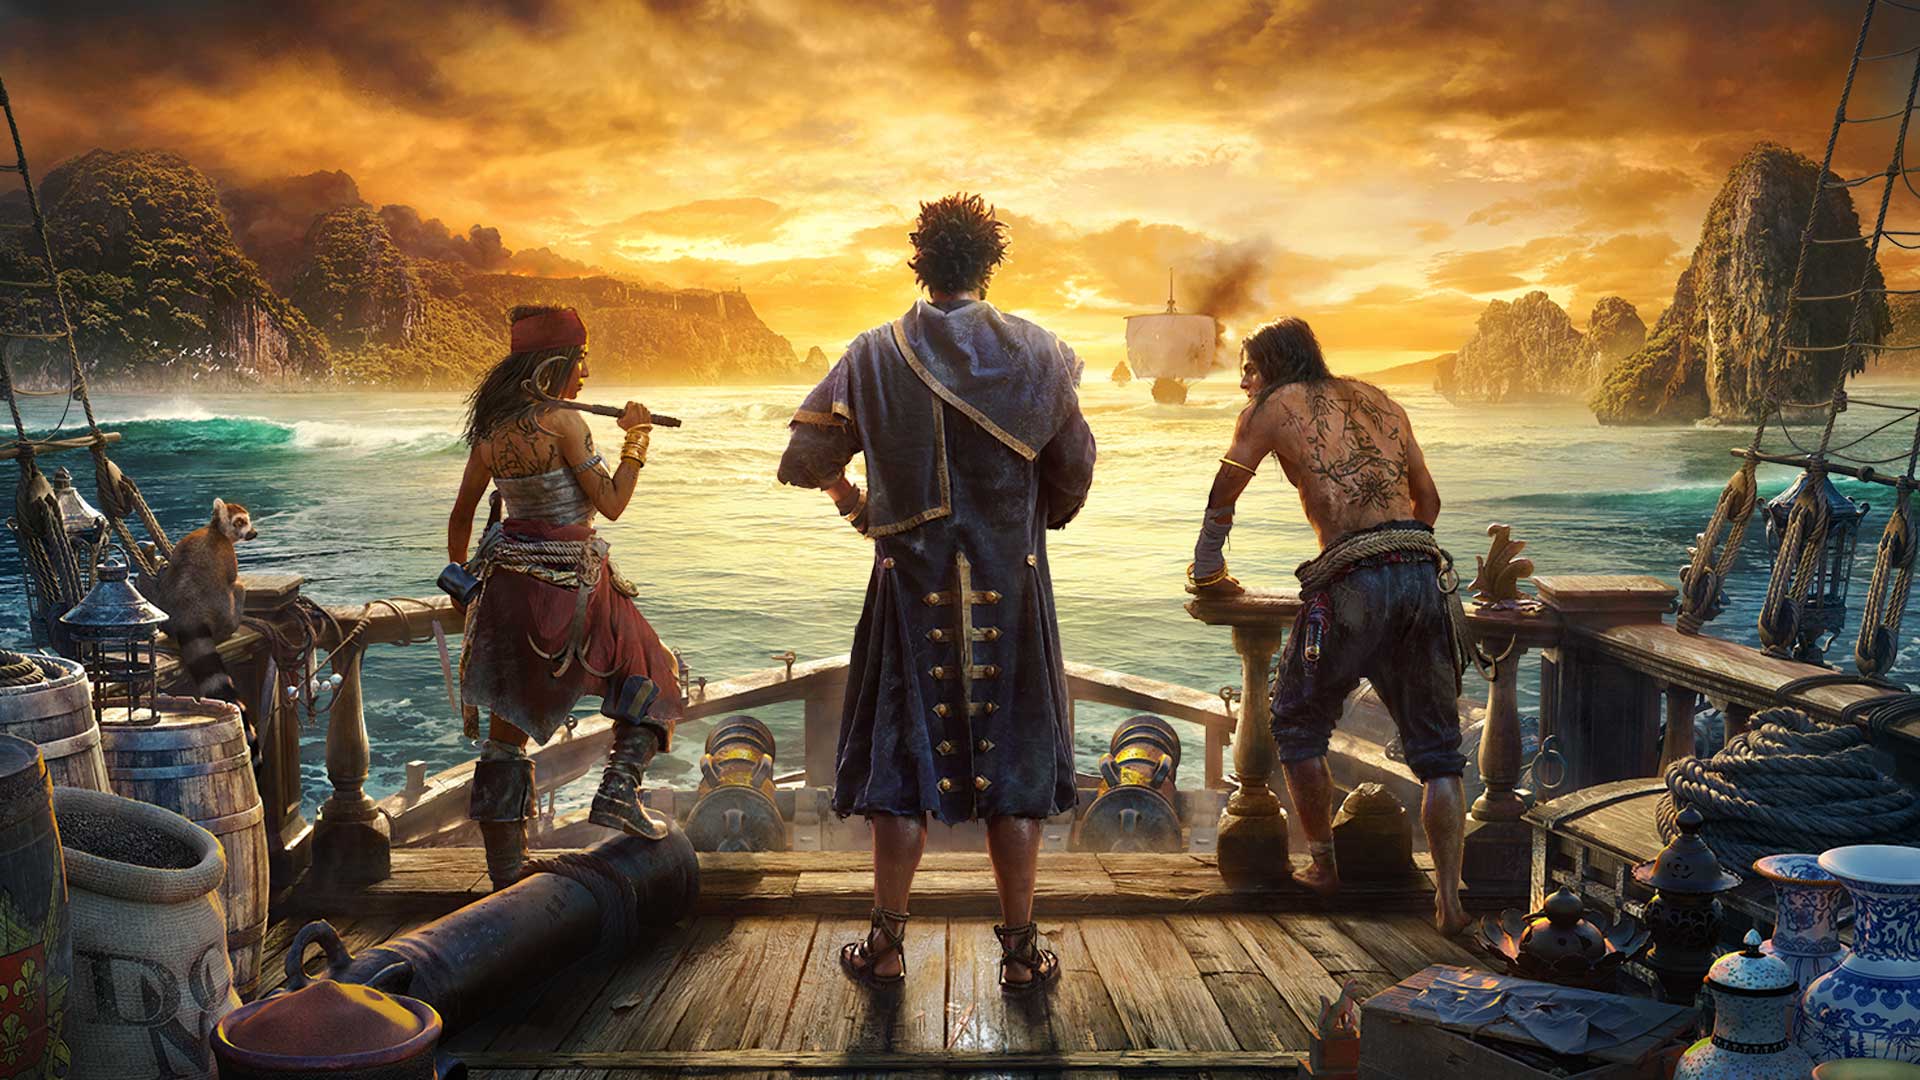 TOP 10 Best Upcoming Pirate Games (2022-2023)